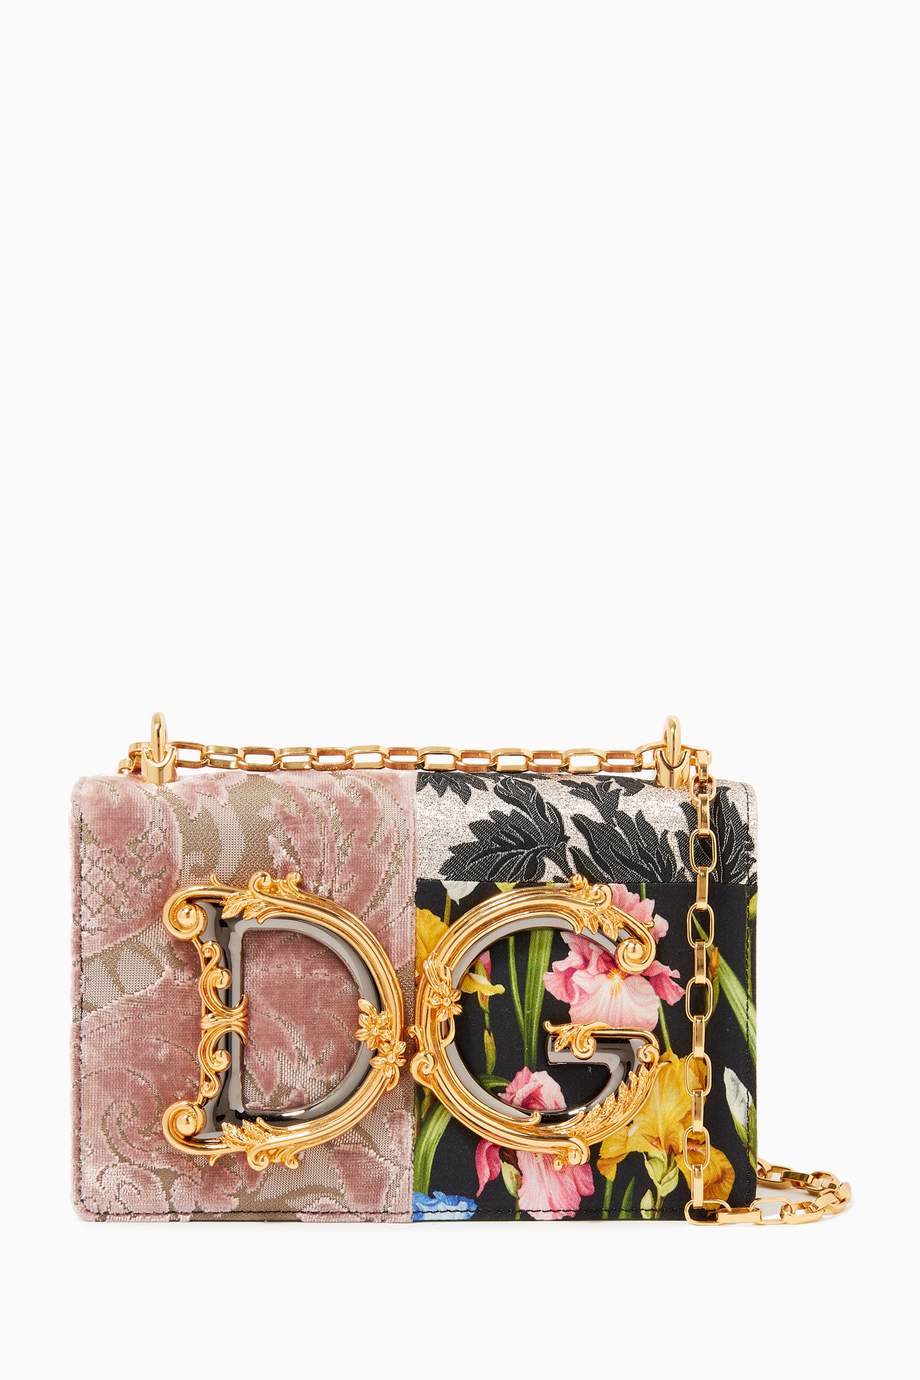 Shop Dolce & Gabbana Multicolour DG Girls Bag in Jacquard Patchwork and ...